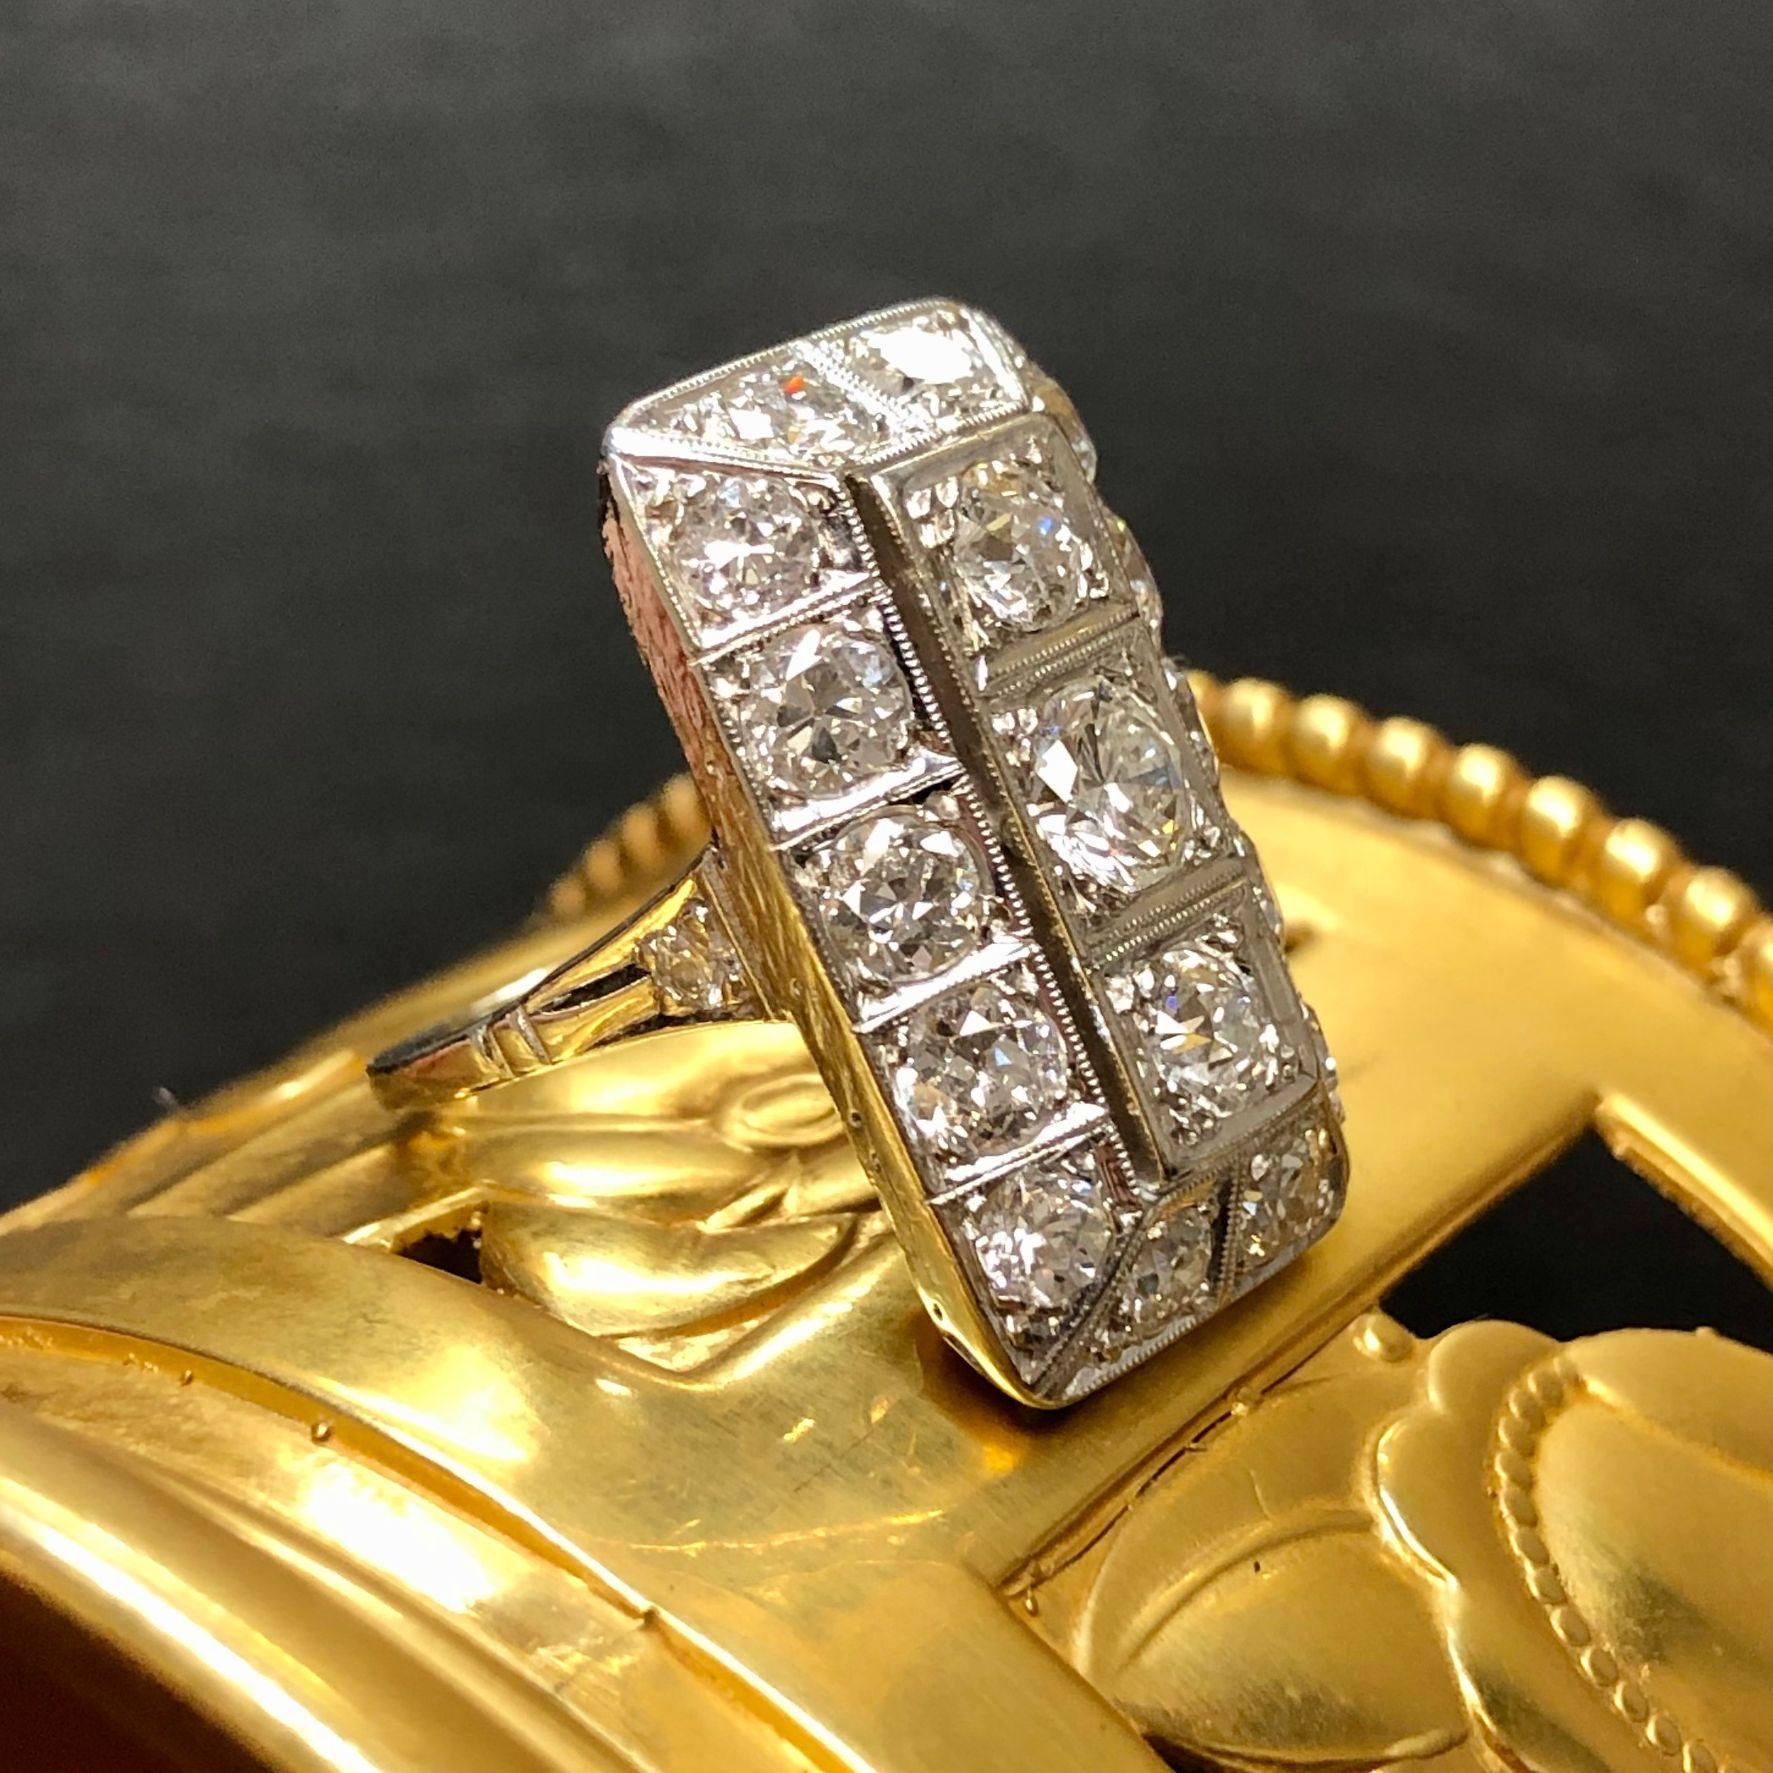 A beautifully made hand crafted 14k Art Deco ring beautifully set with approximately 3.80cttw in larger, well matched Old European cut diamonds being G-I in color and Vs1-2 in clarity.


Dimensions

1” long by 1/2” wide. Size 5